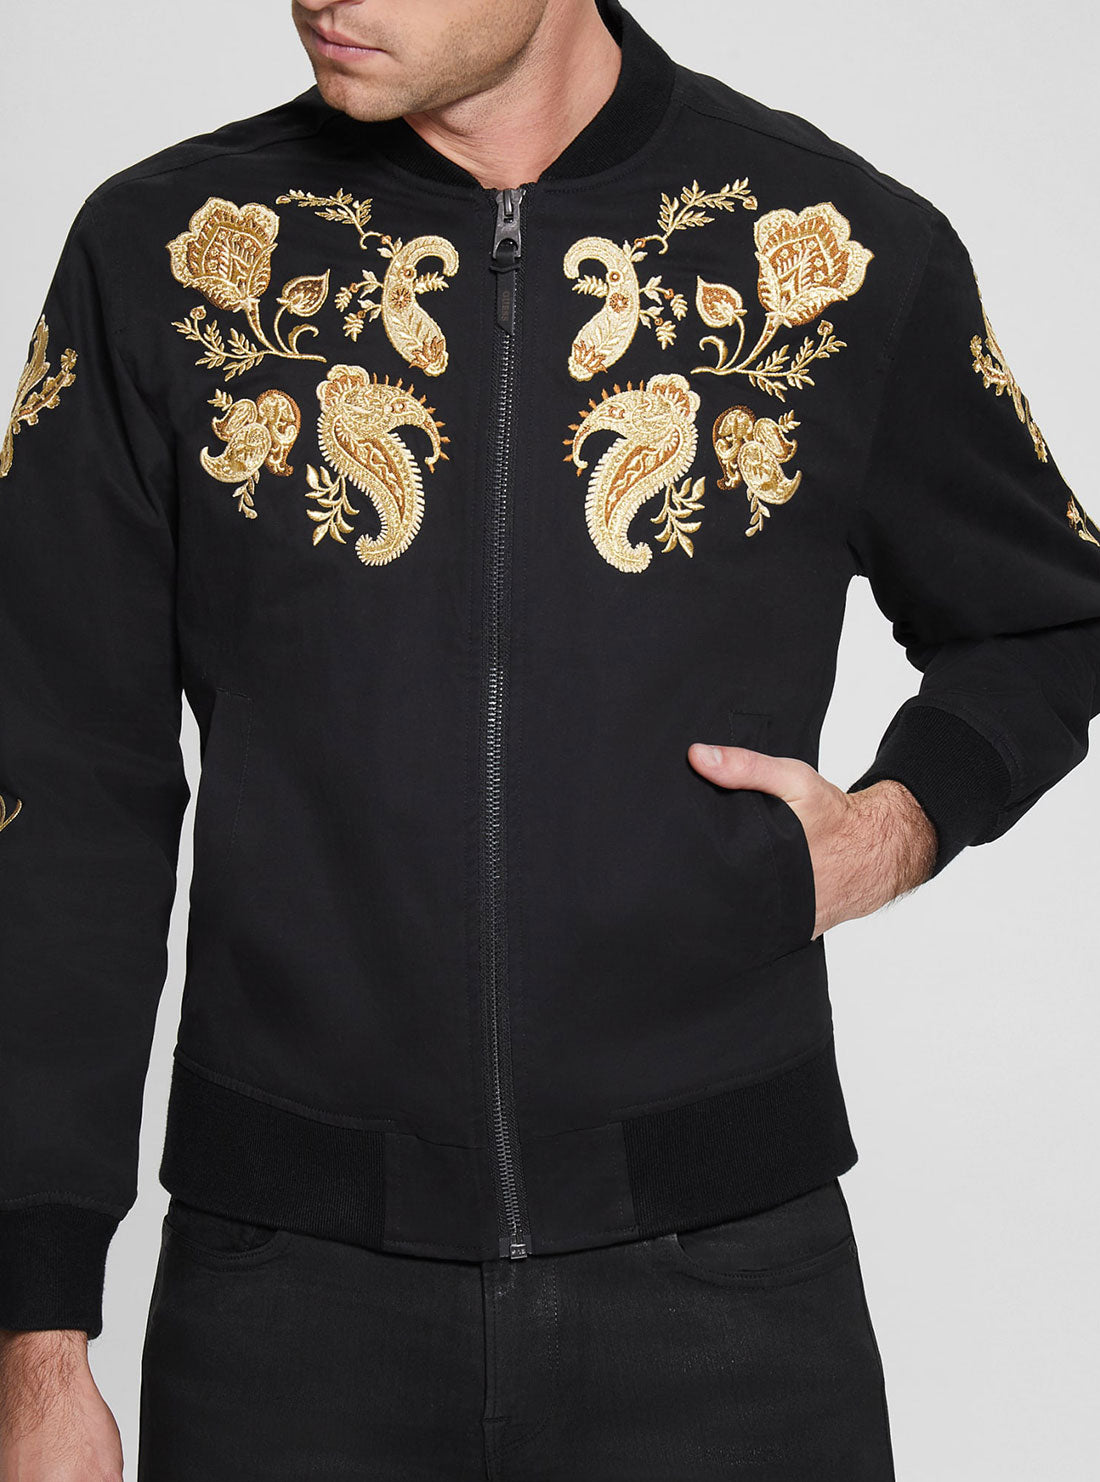 GUESS Men's Black Maxim Embroidered Bomber Jacket M3RL48RDYK0 Detail View